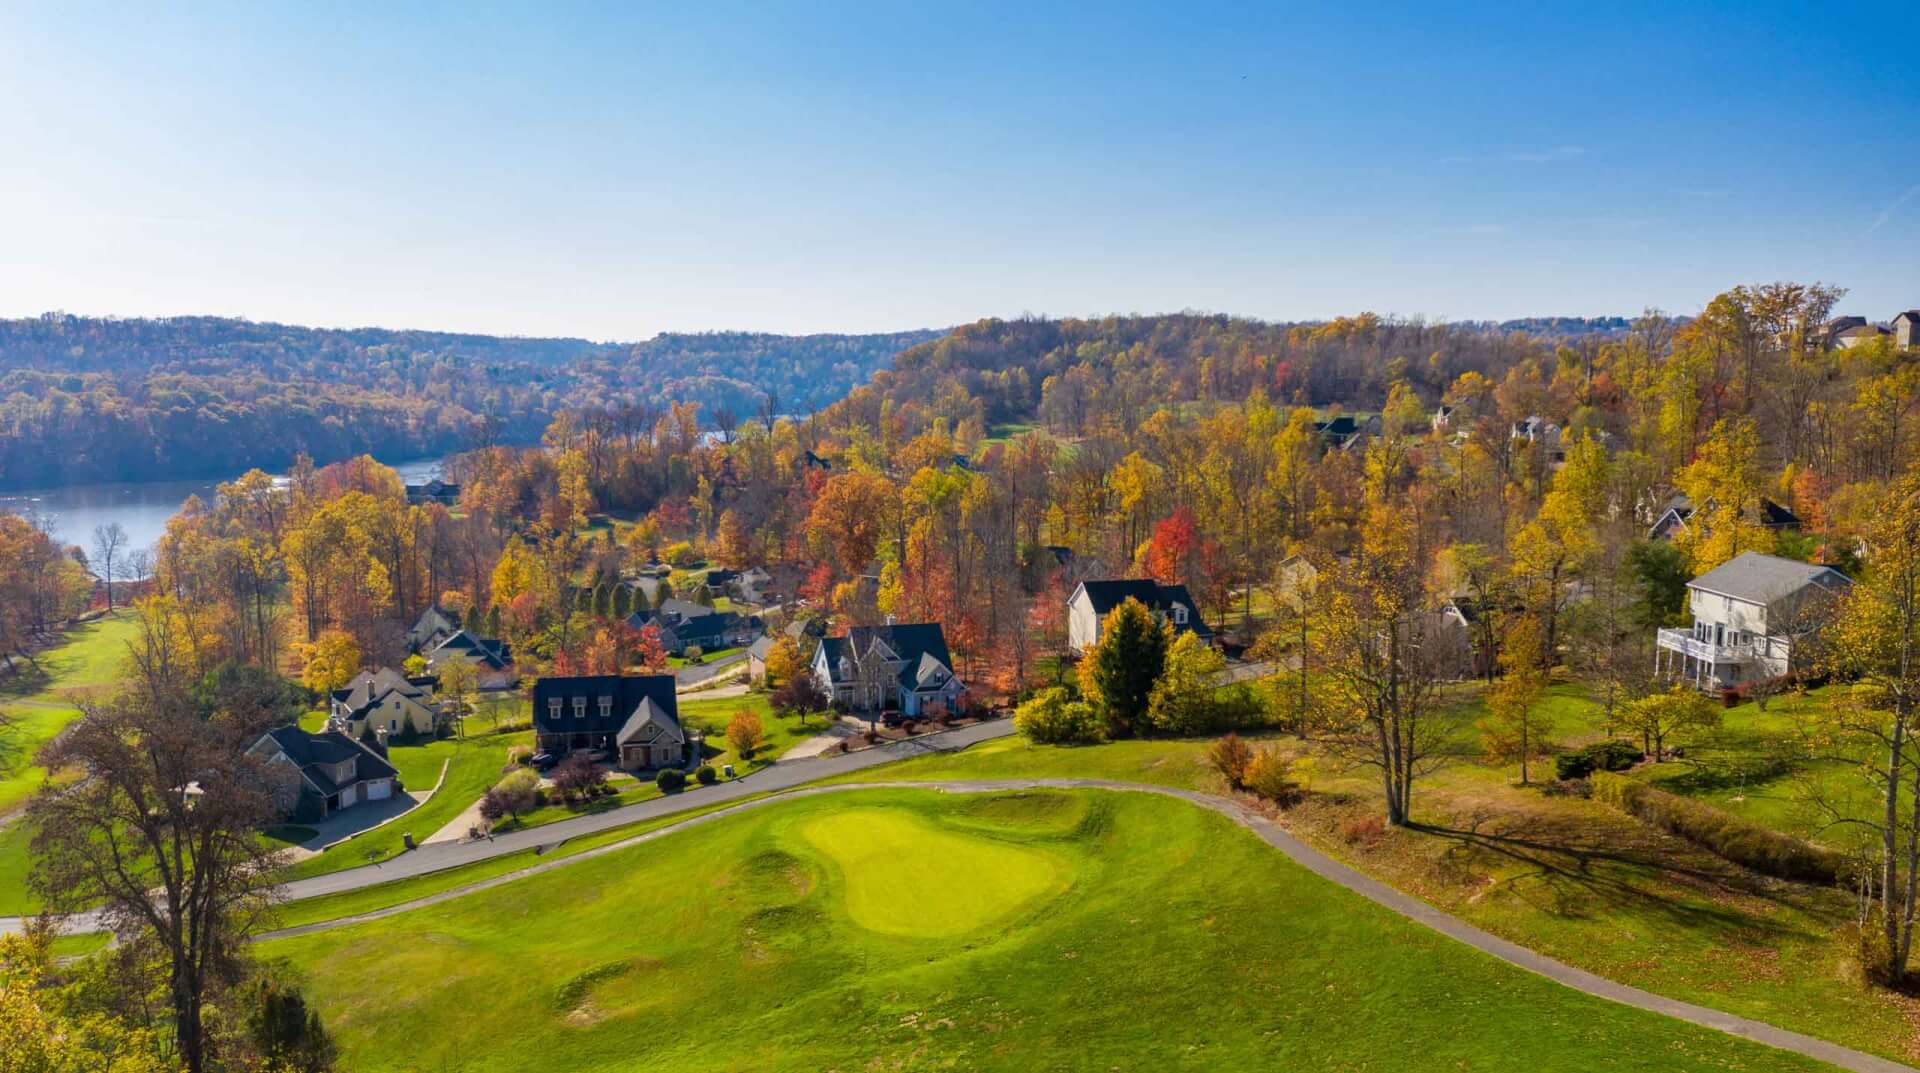 Aerial panorama of single family houses set among golf fairway and greens by a lake in autumn.